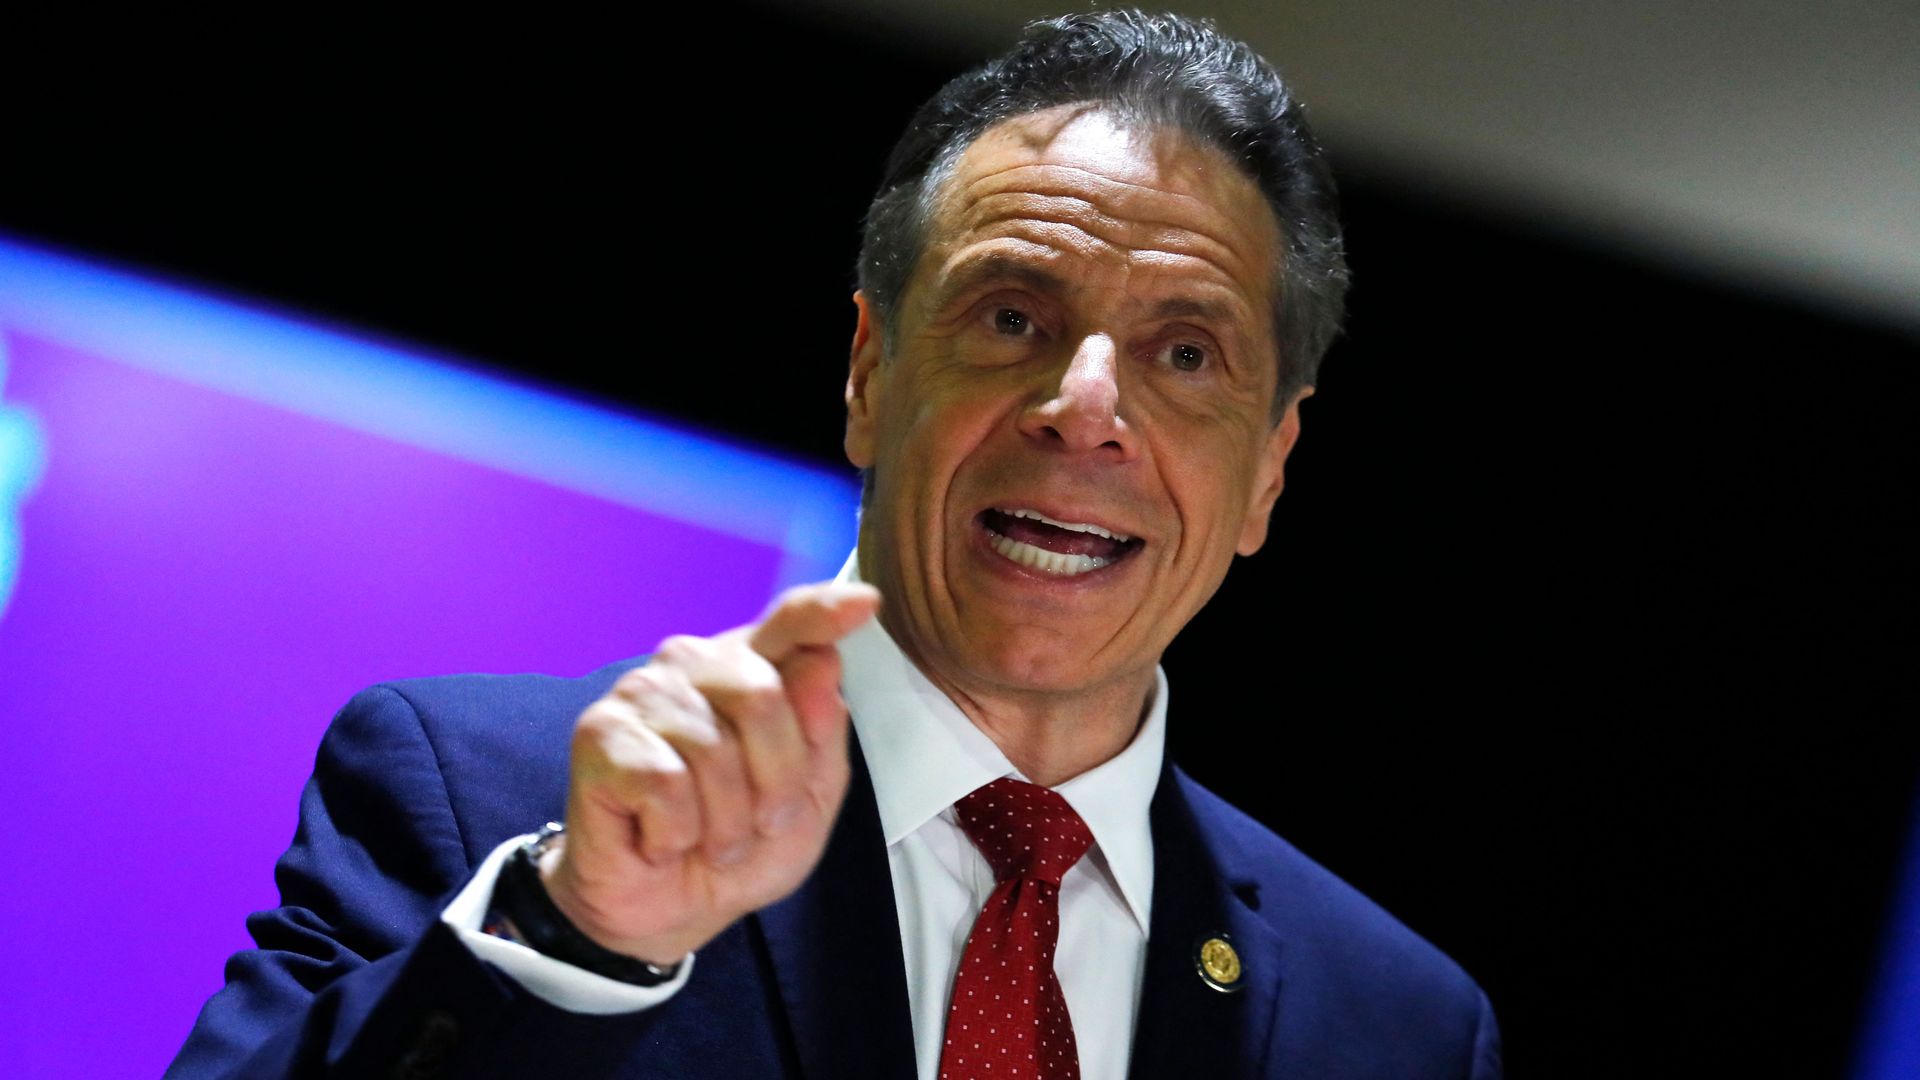 Cuomo points his index finger while wearing a suit